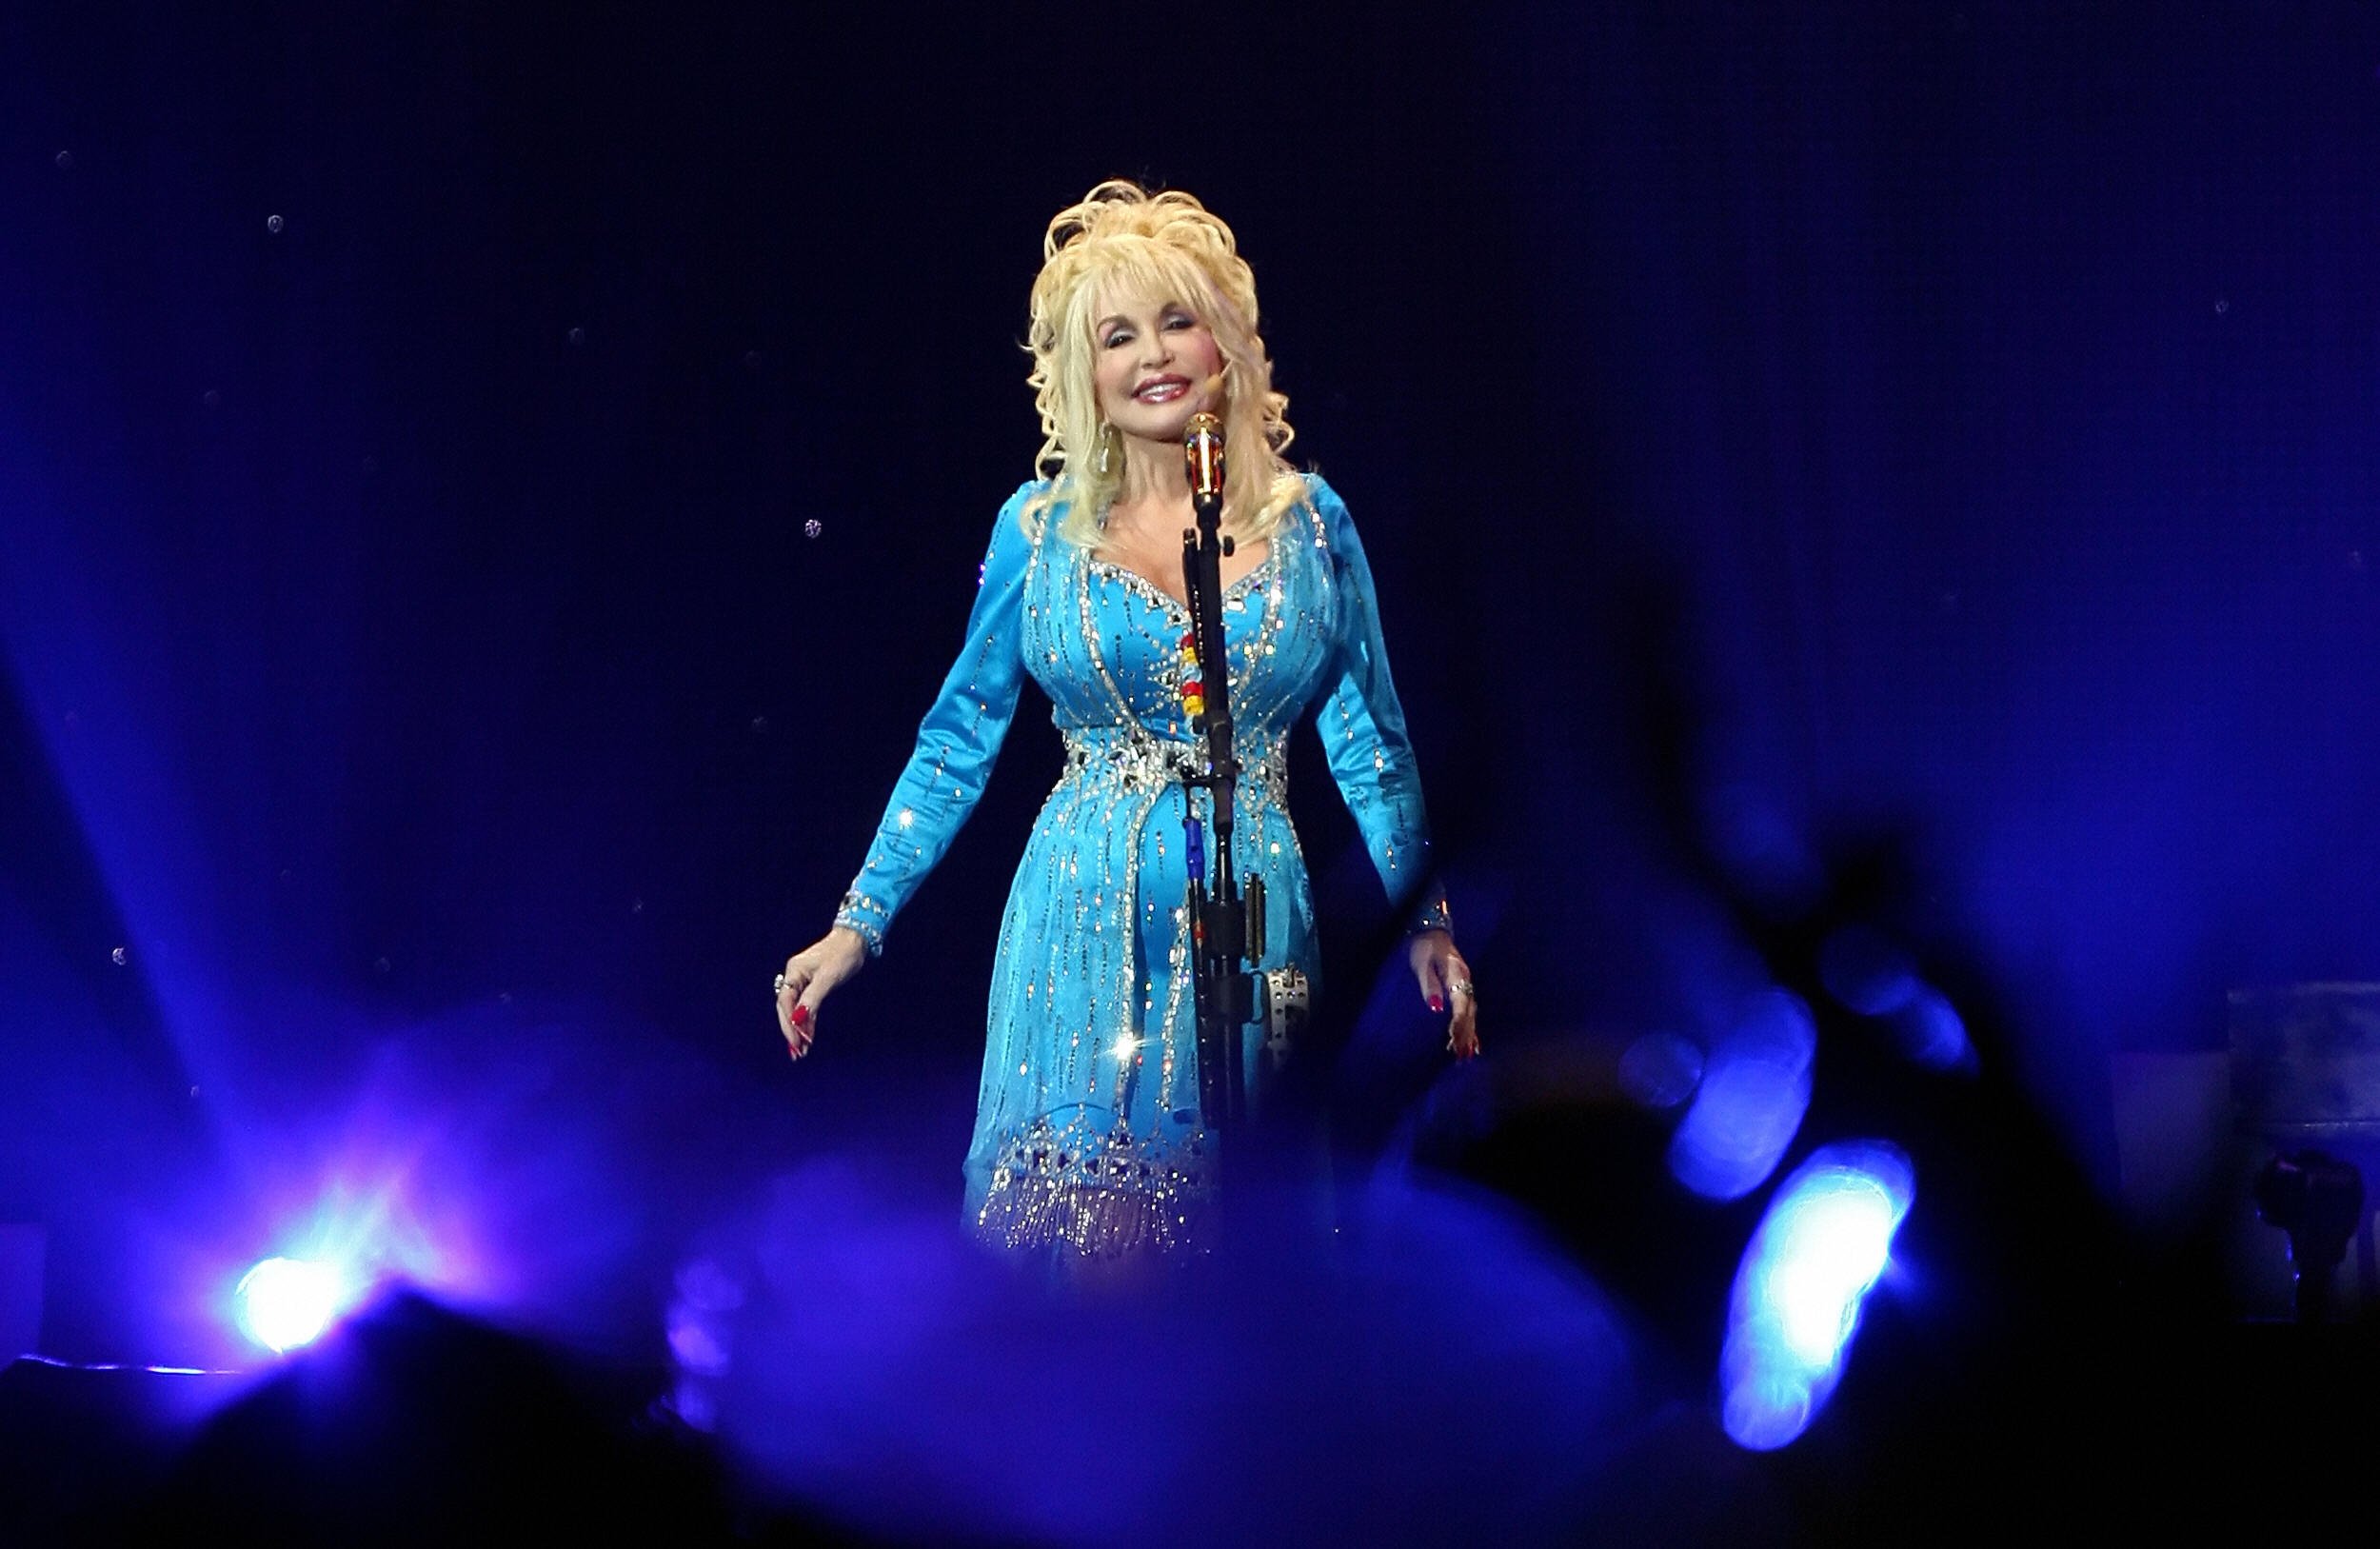 Dolly Parton in a blue dress